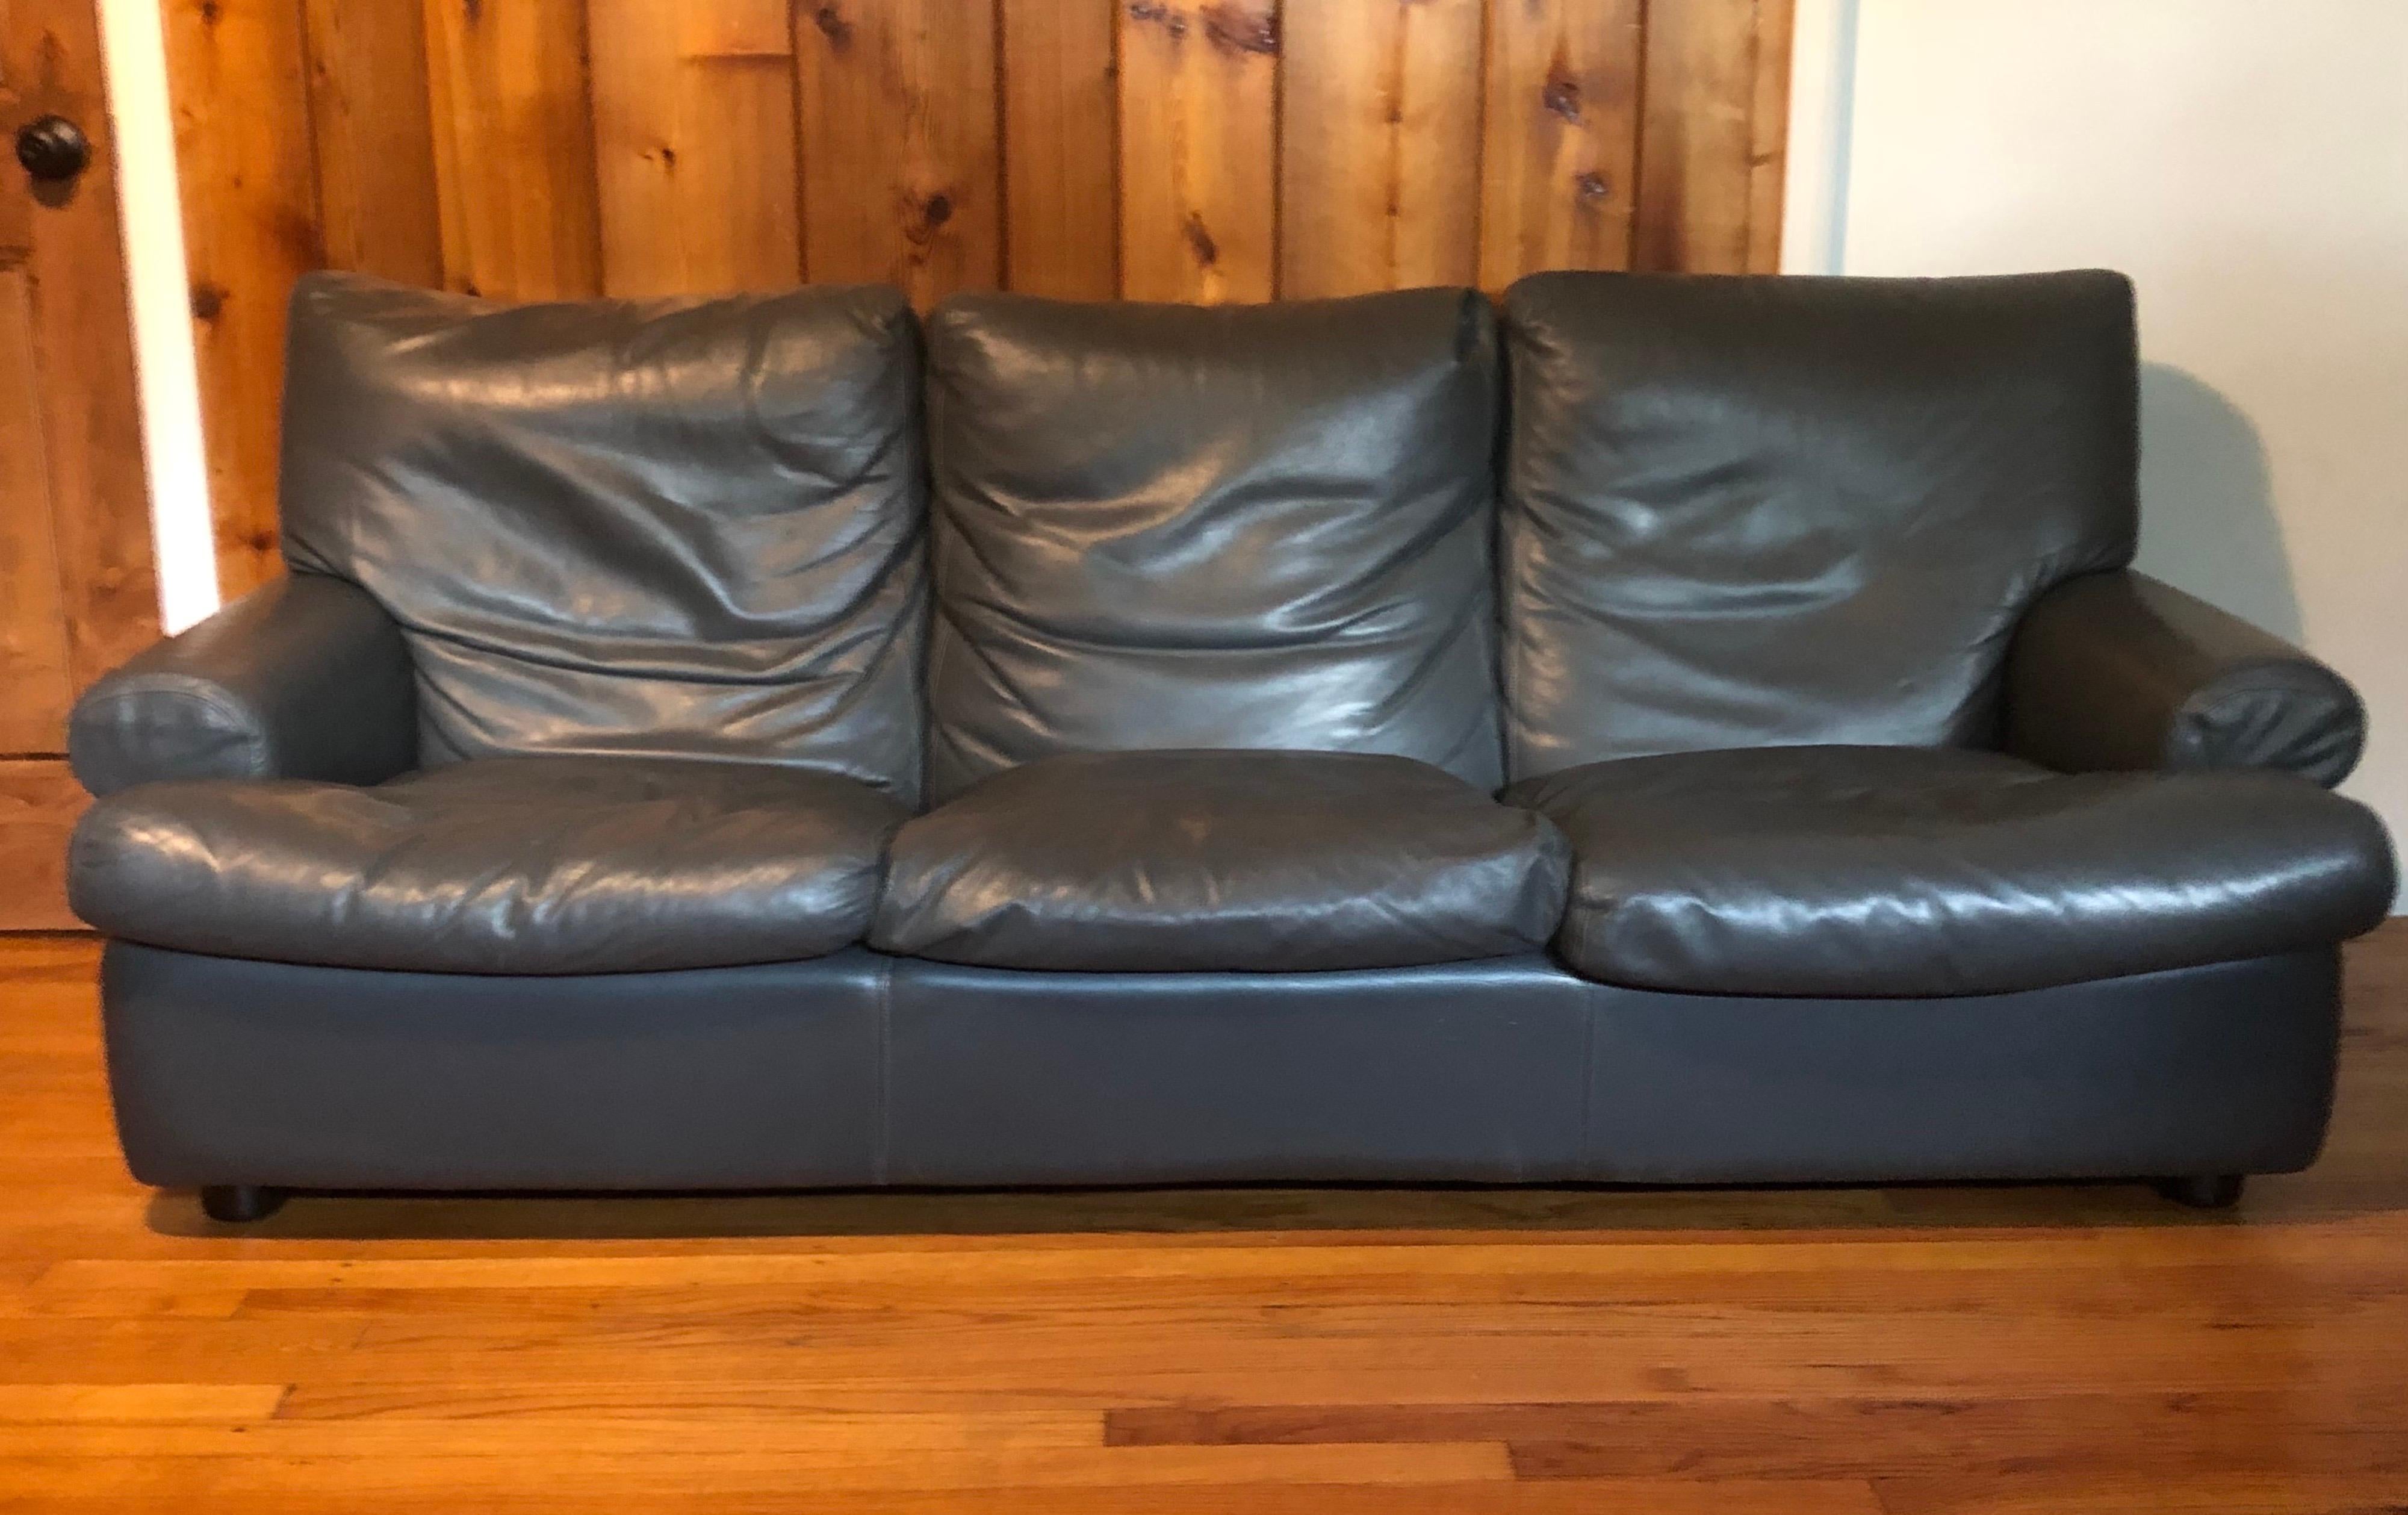 Classic French Art Deco 1930 style stitched, grey leather sofa circa 1970 with pure, clean lines and an elegant, relaxed form. The leather has been lightly used and is in good overall condition. The seat and back cushions are down filled. The sofa /